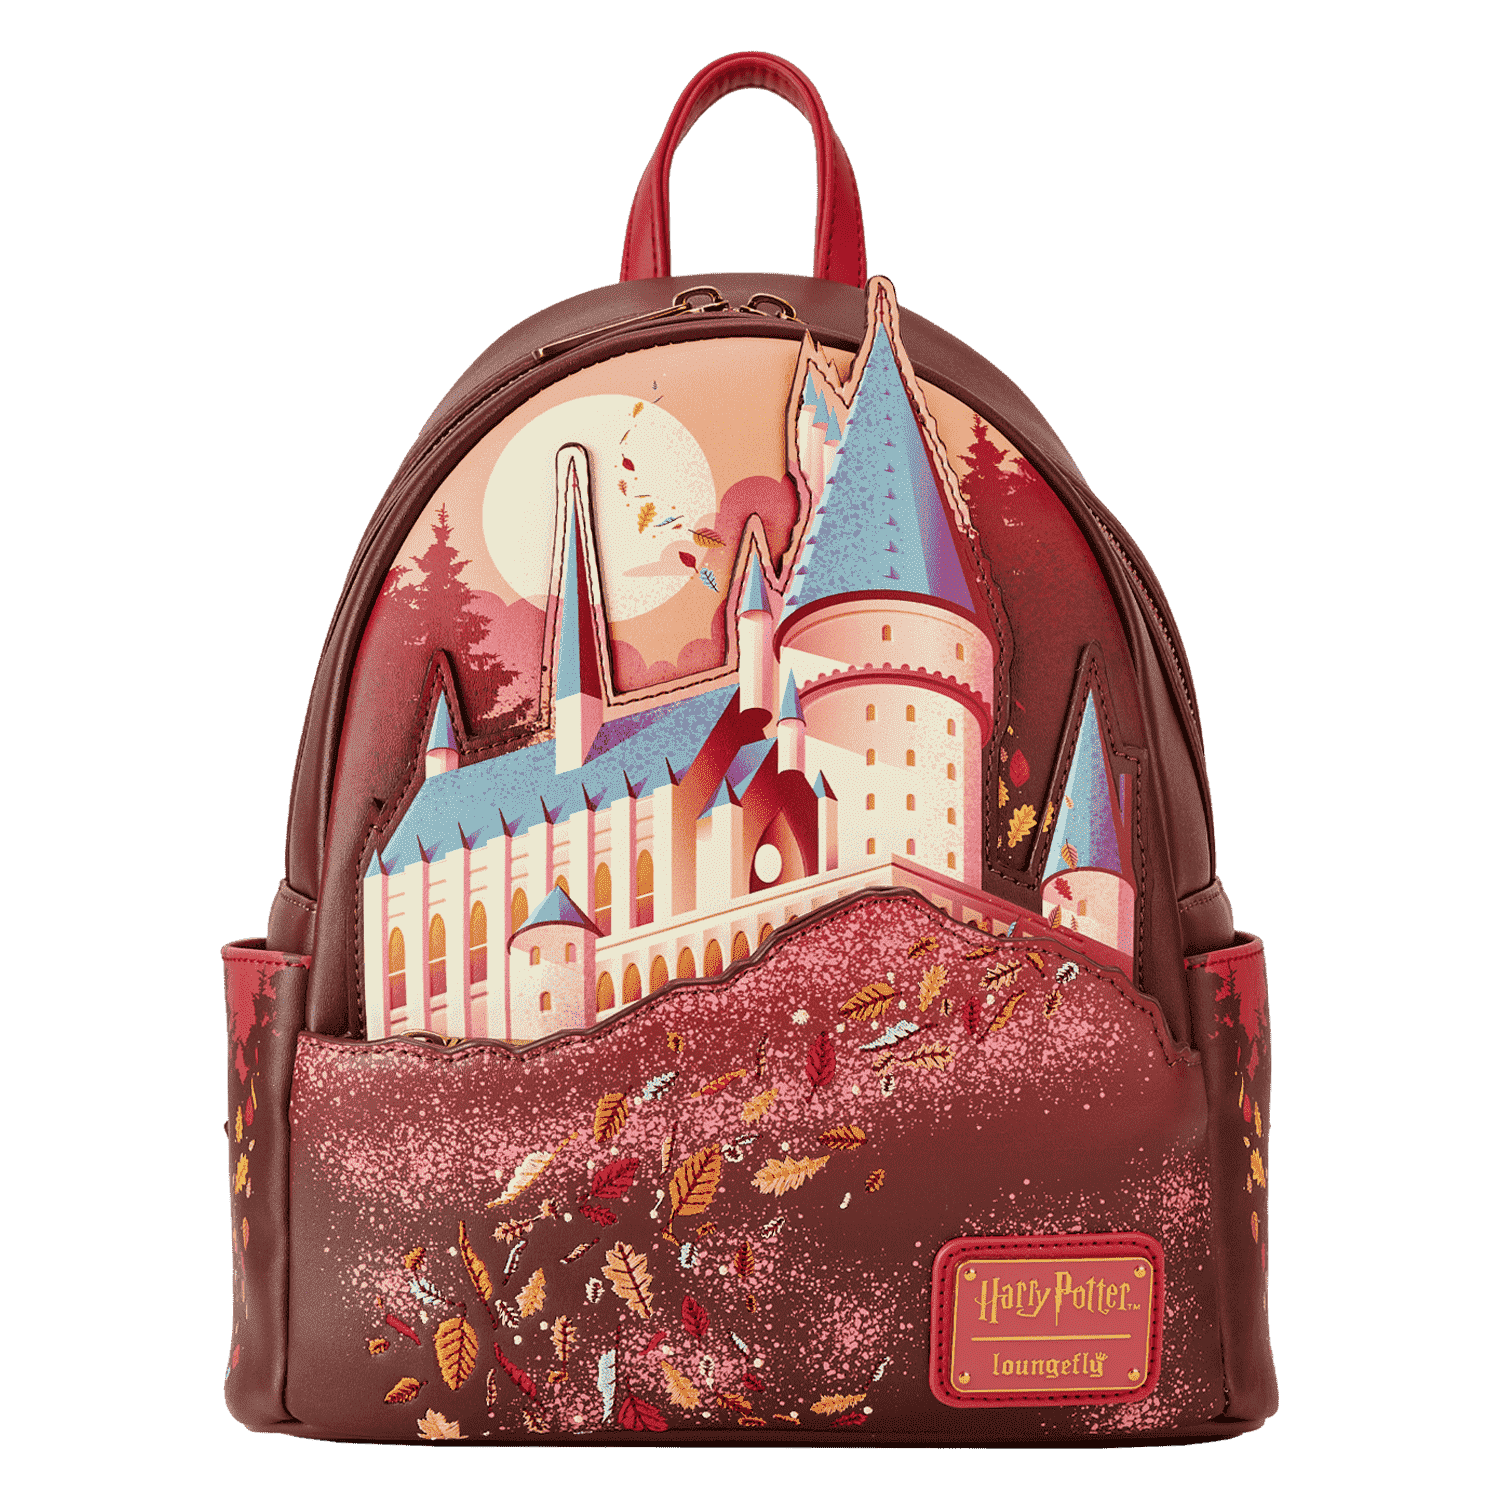 Buy Harry Potter Hogwarts Fall Leaves Mini Backpack at Loungefly.